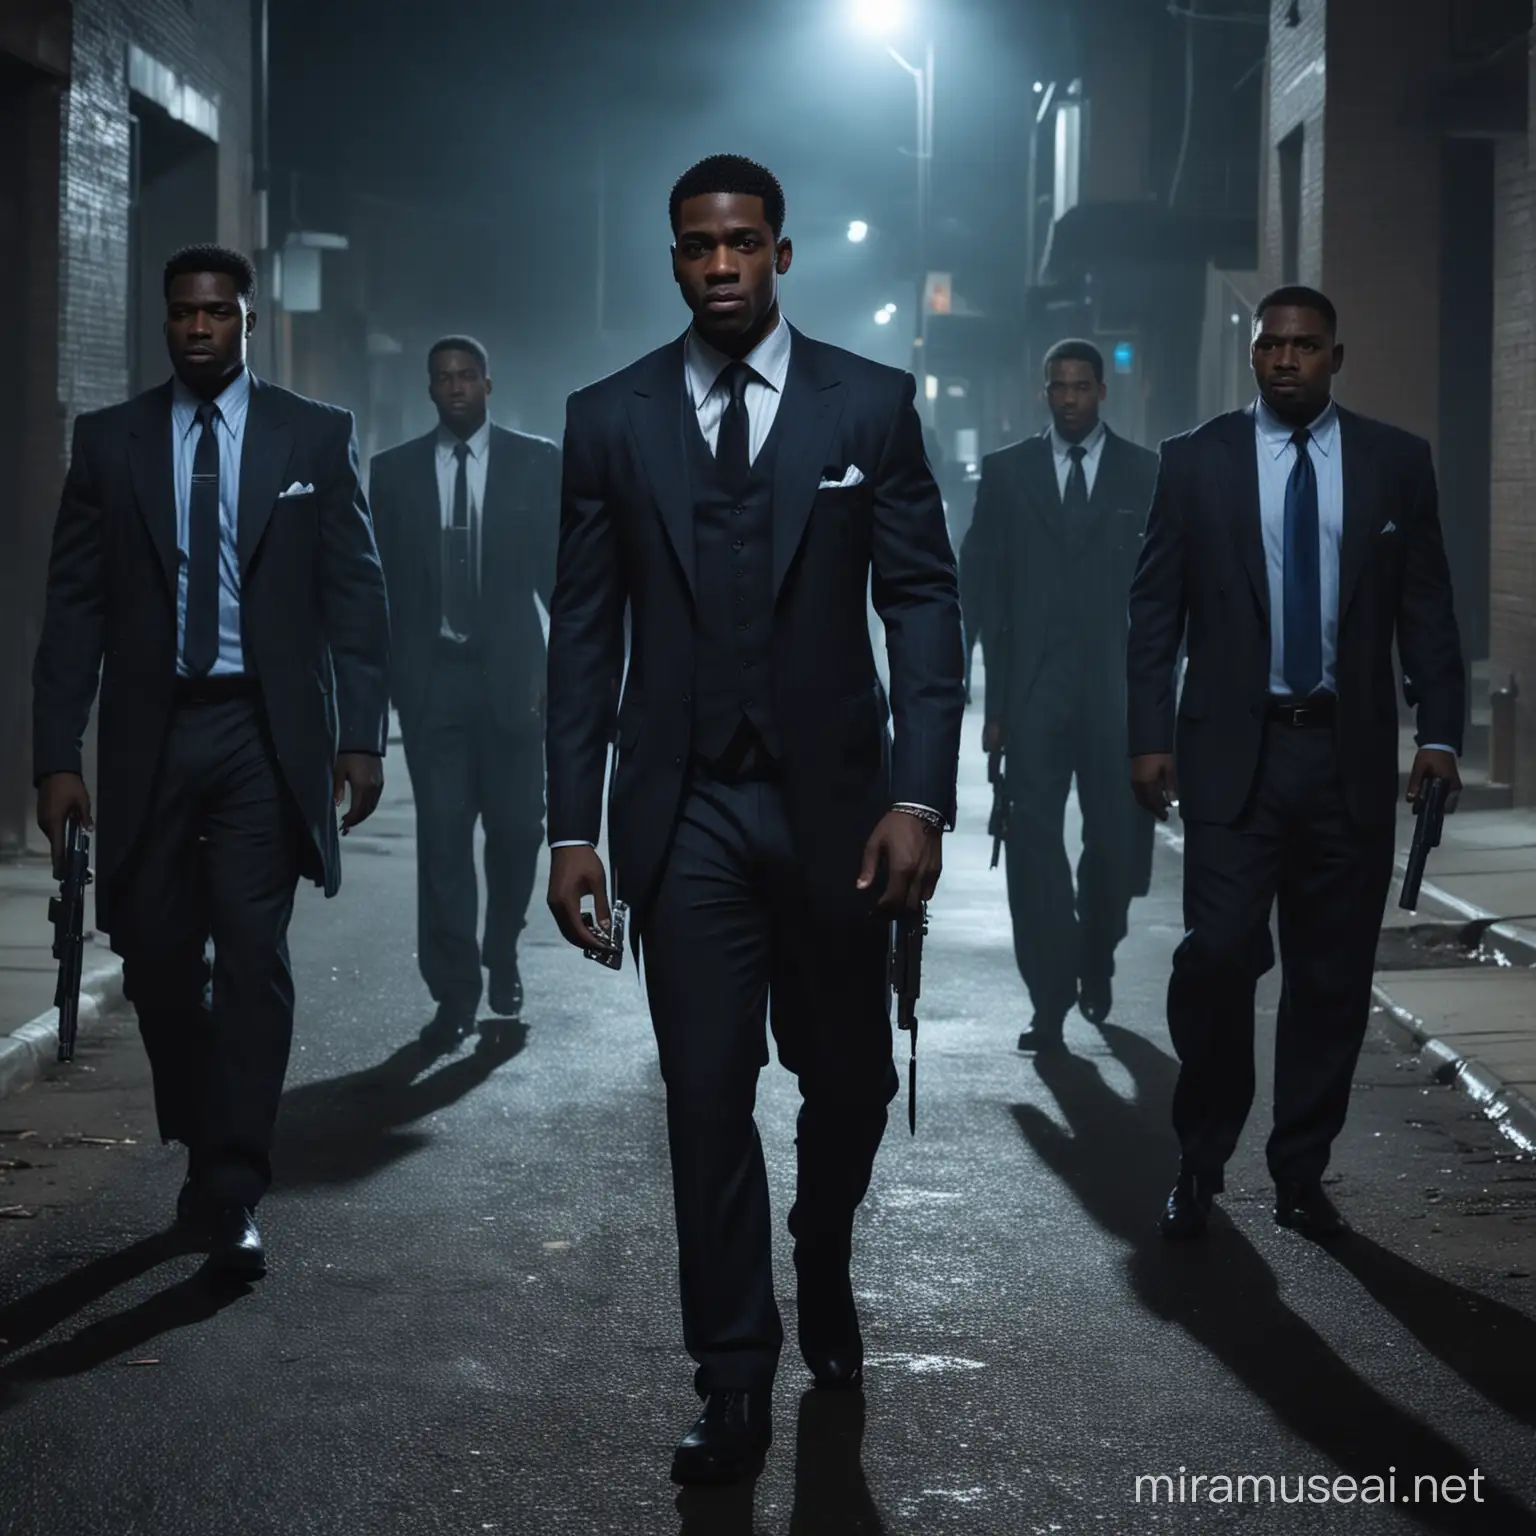 Moonlit Walk Confident Man in Suit with Gangster Escorts